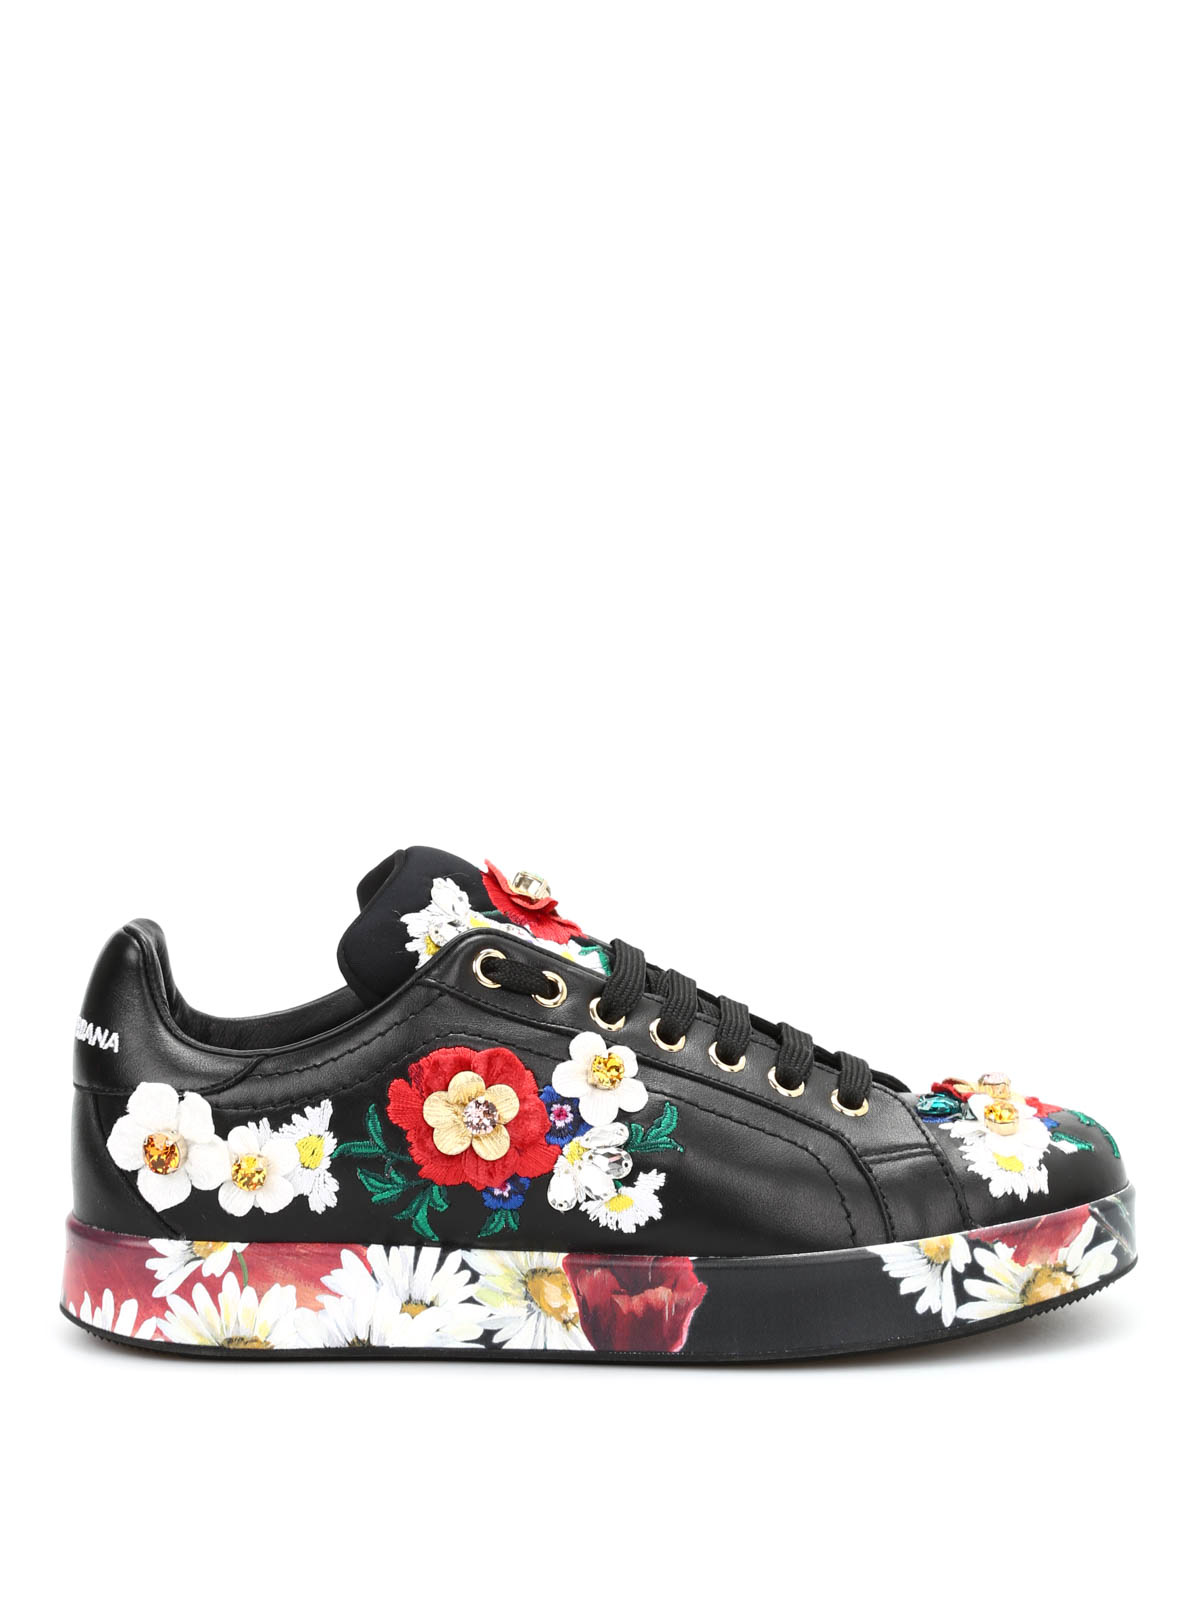 Trainers Dolce Gabbana - Floral embroidered sneakers CK0058AD19580001